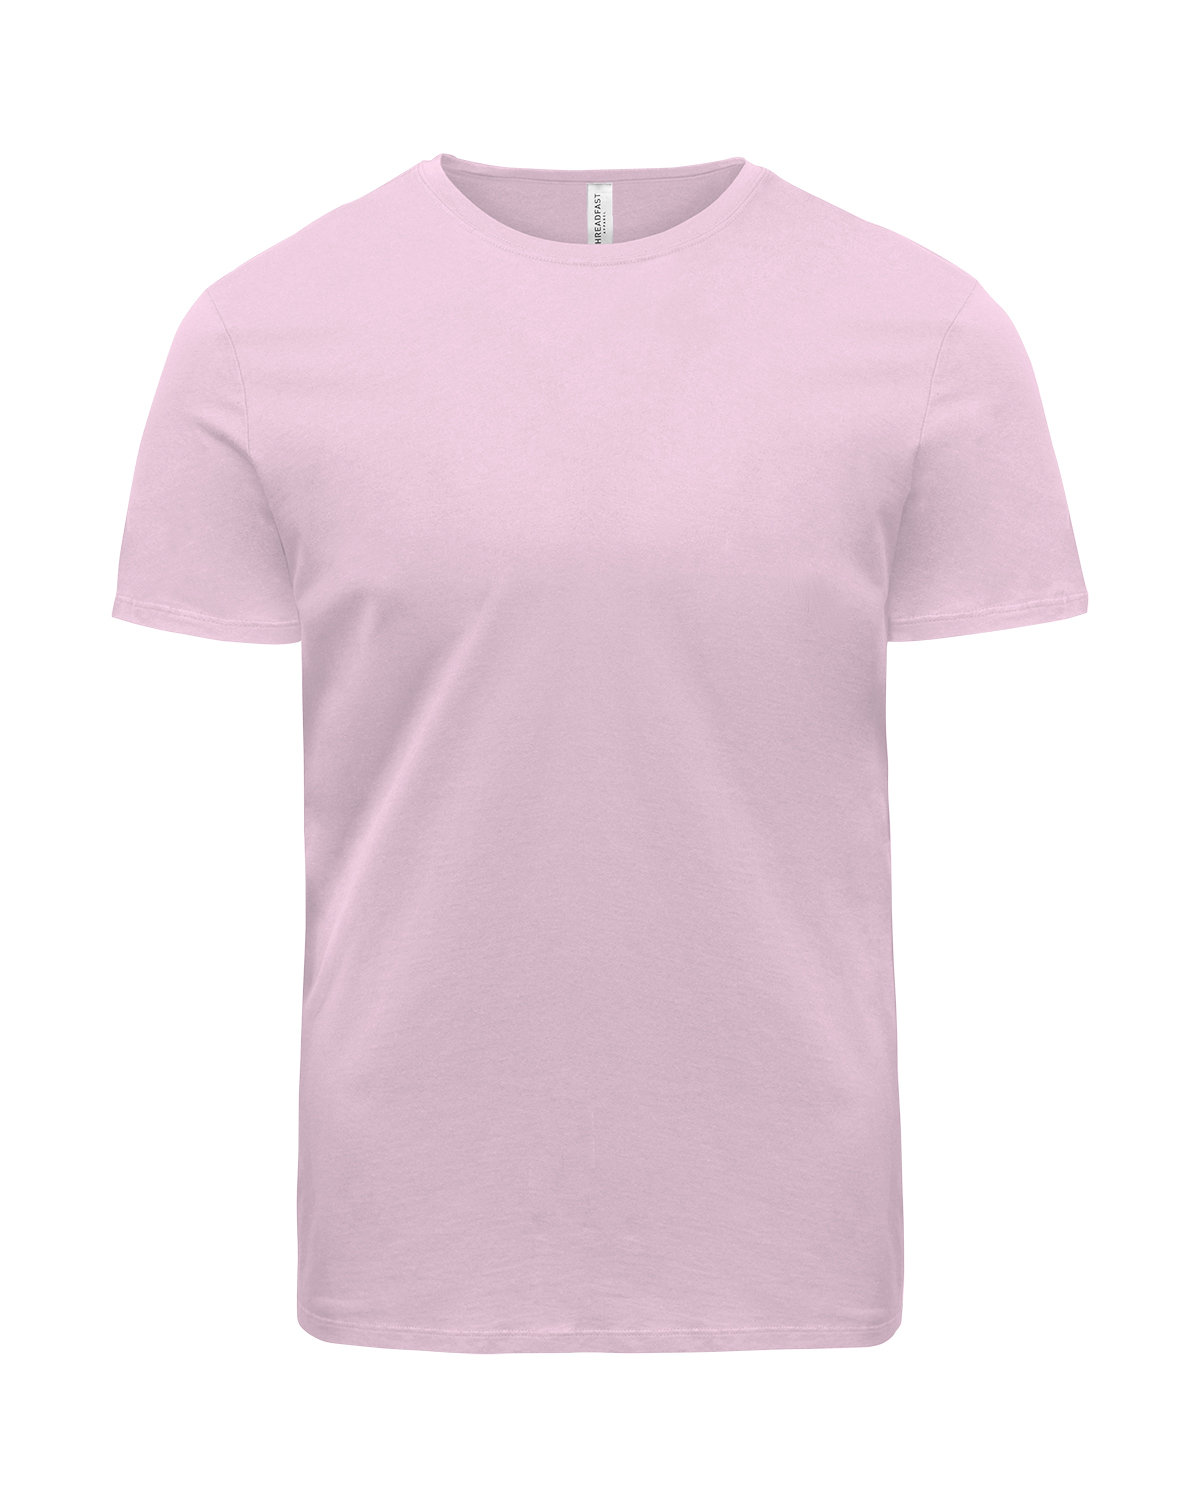 click to view POWDER PINK